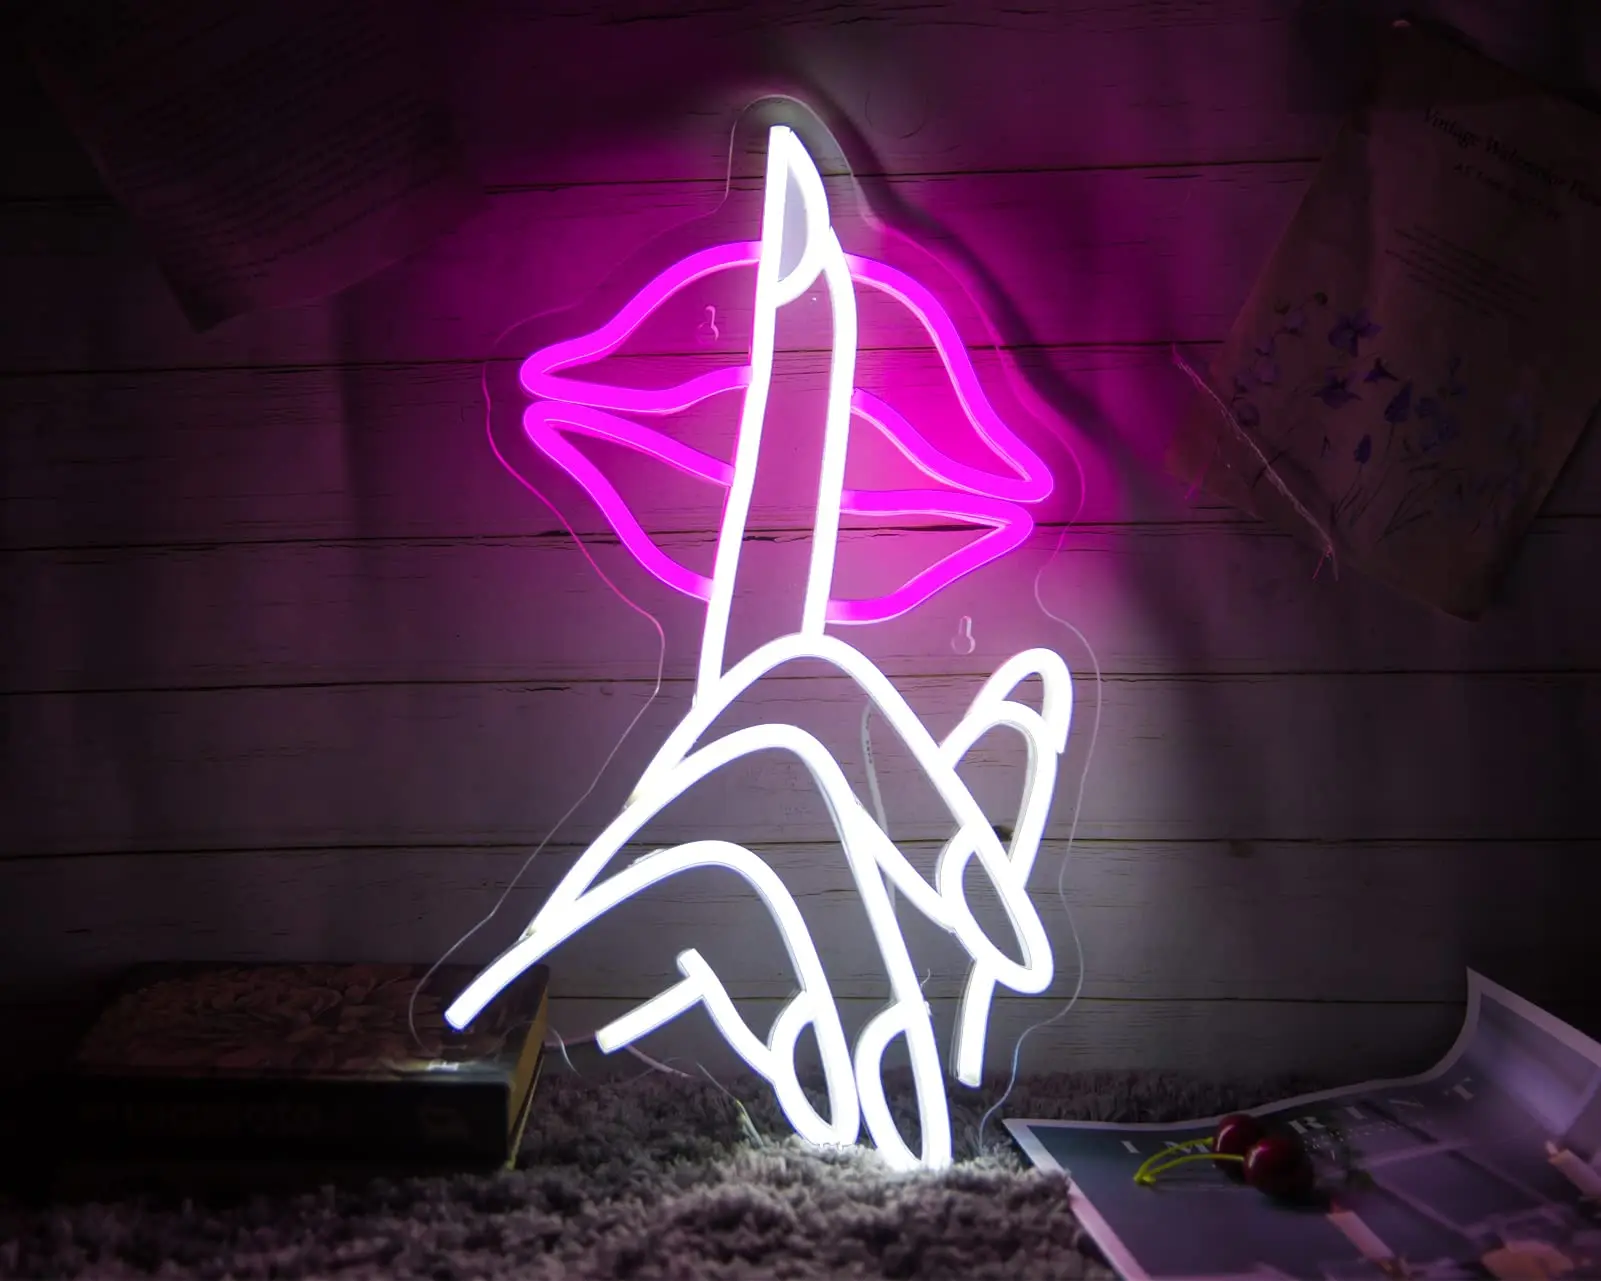 

Be Quiet Finger on Lips Neon Sign USB Powered Secret Lips Hanging LED Neon Light for Girls Bedroom Bar Pub Cafe Wall Decor